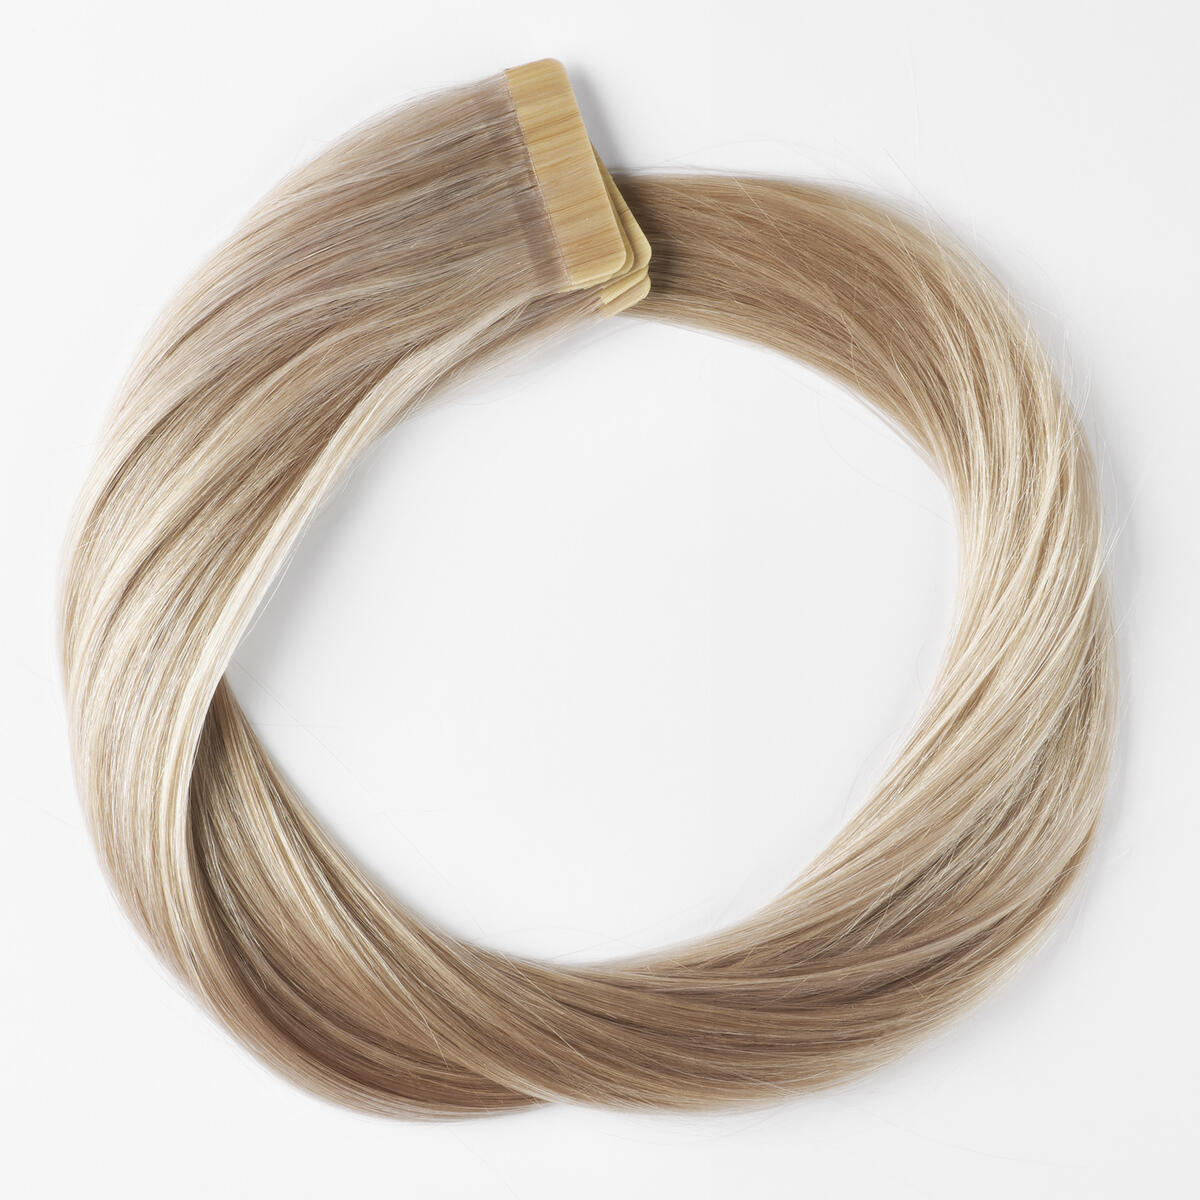 Basic Tape Extensions Classic 4 10.5 Grey 30 cm